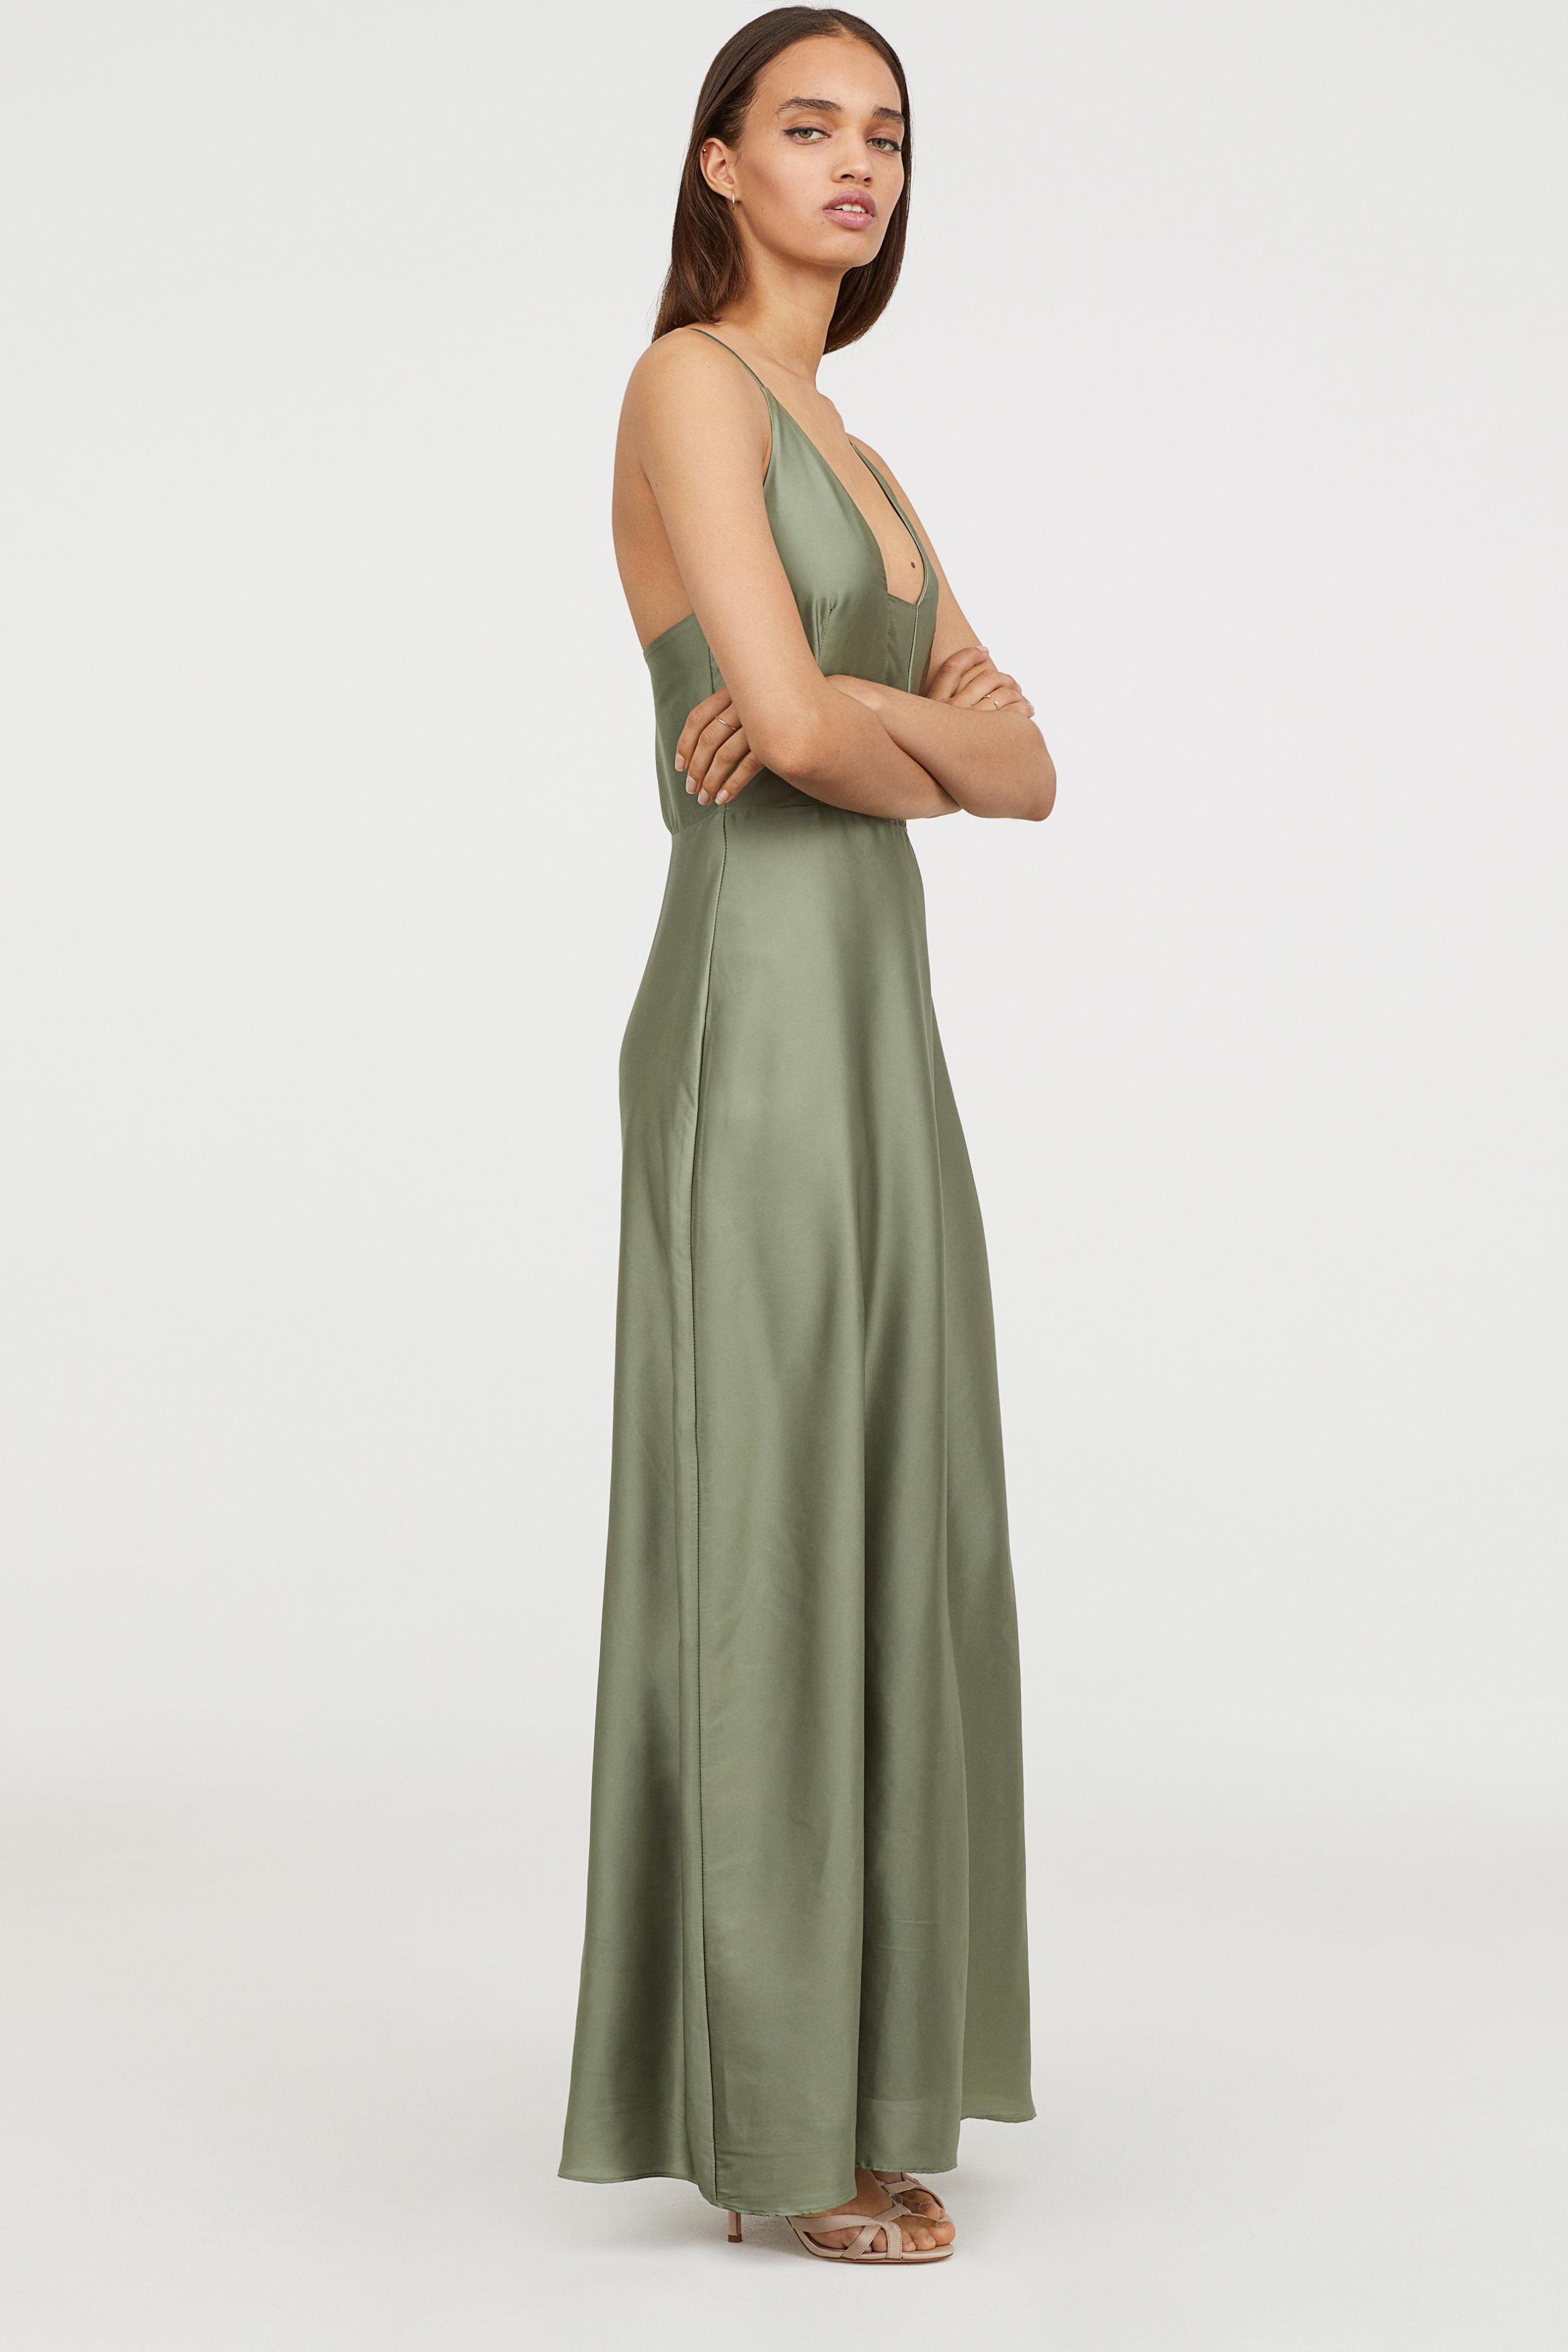 H And M Maxi Dress Online Shop, UP TO ...